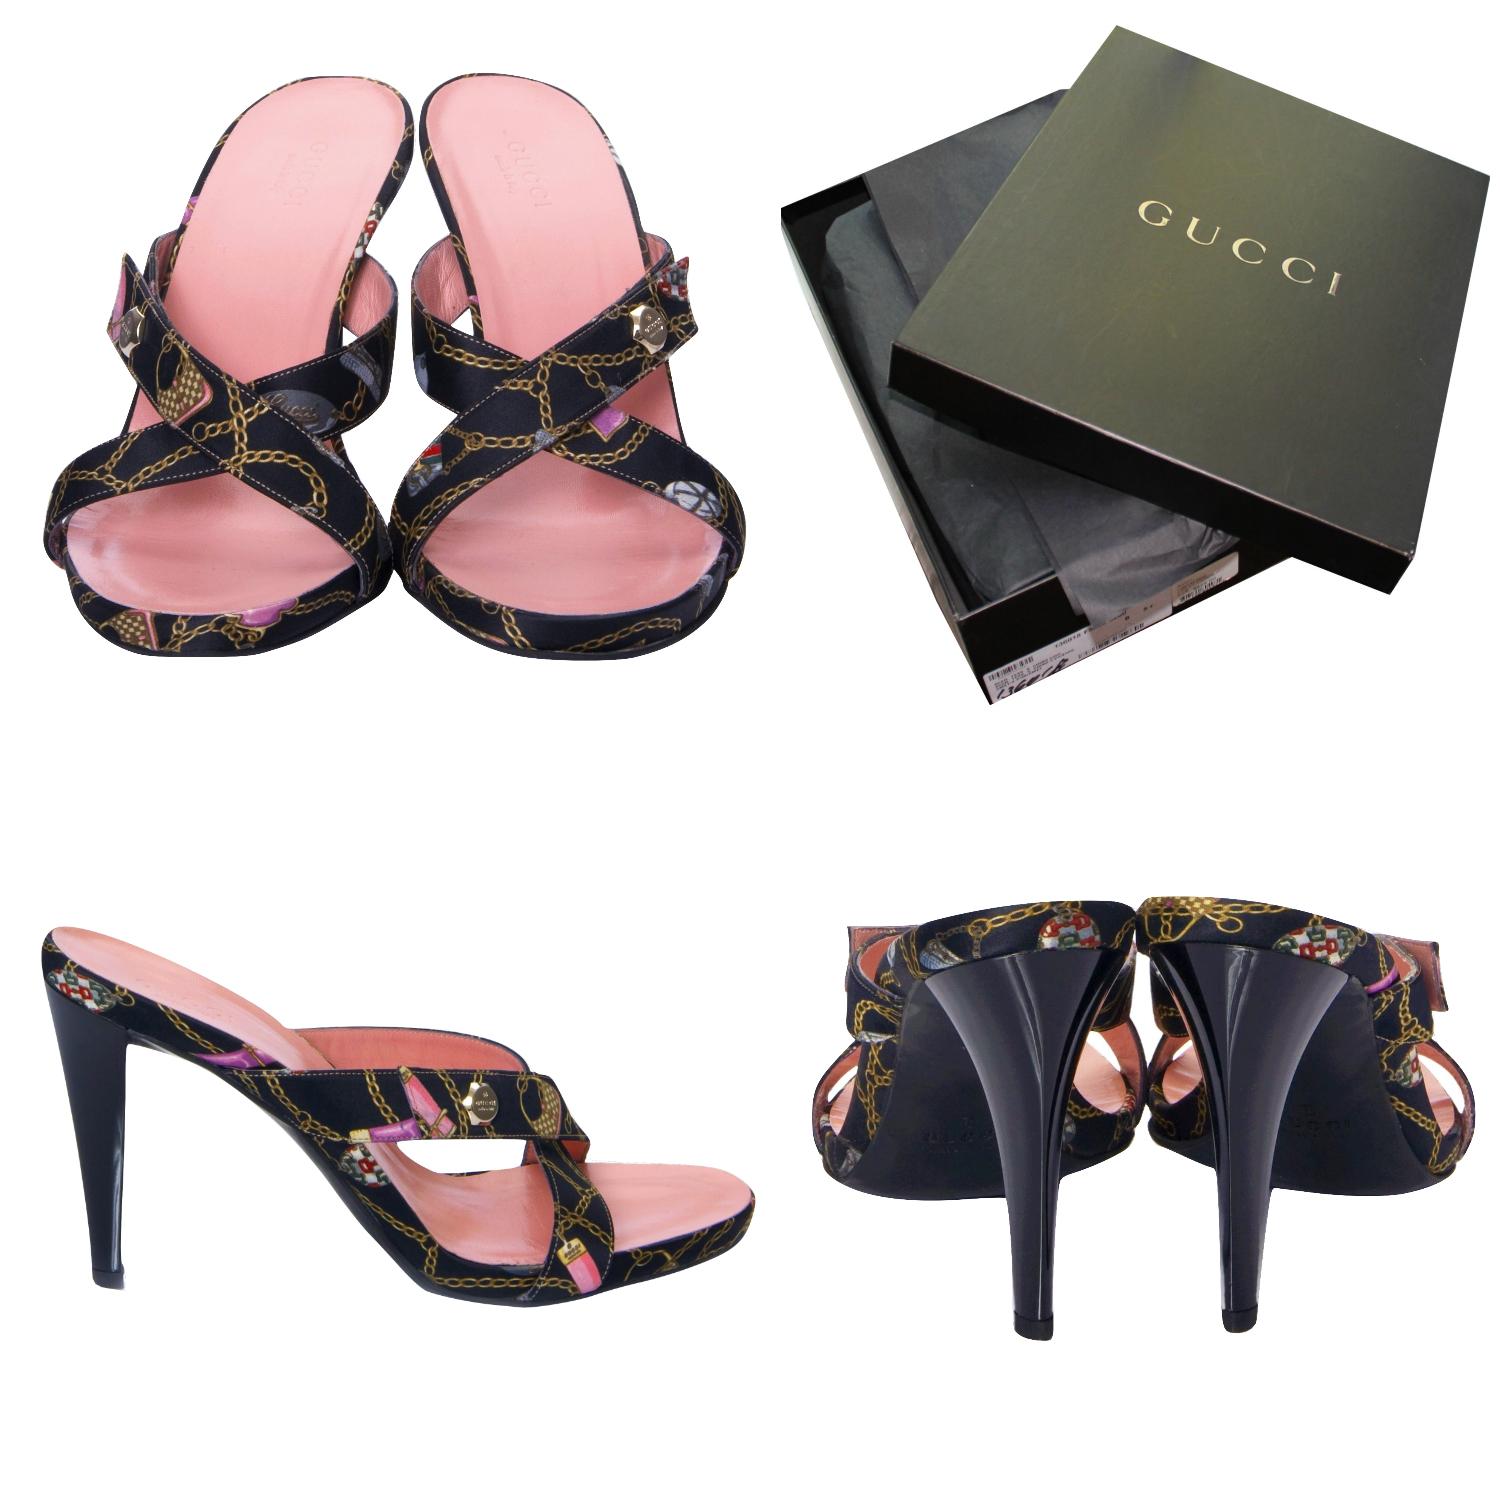 Tom Ford Era Gucci Heels
Brand New
* Stunning Black Logo Satin
* Satin Print in Linked Chains, Handbags, Horsebit
* Black Lacquered Heel
* Soft Pink Leather Footbed
* 1/2